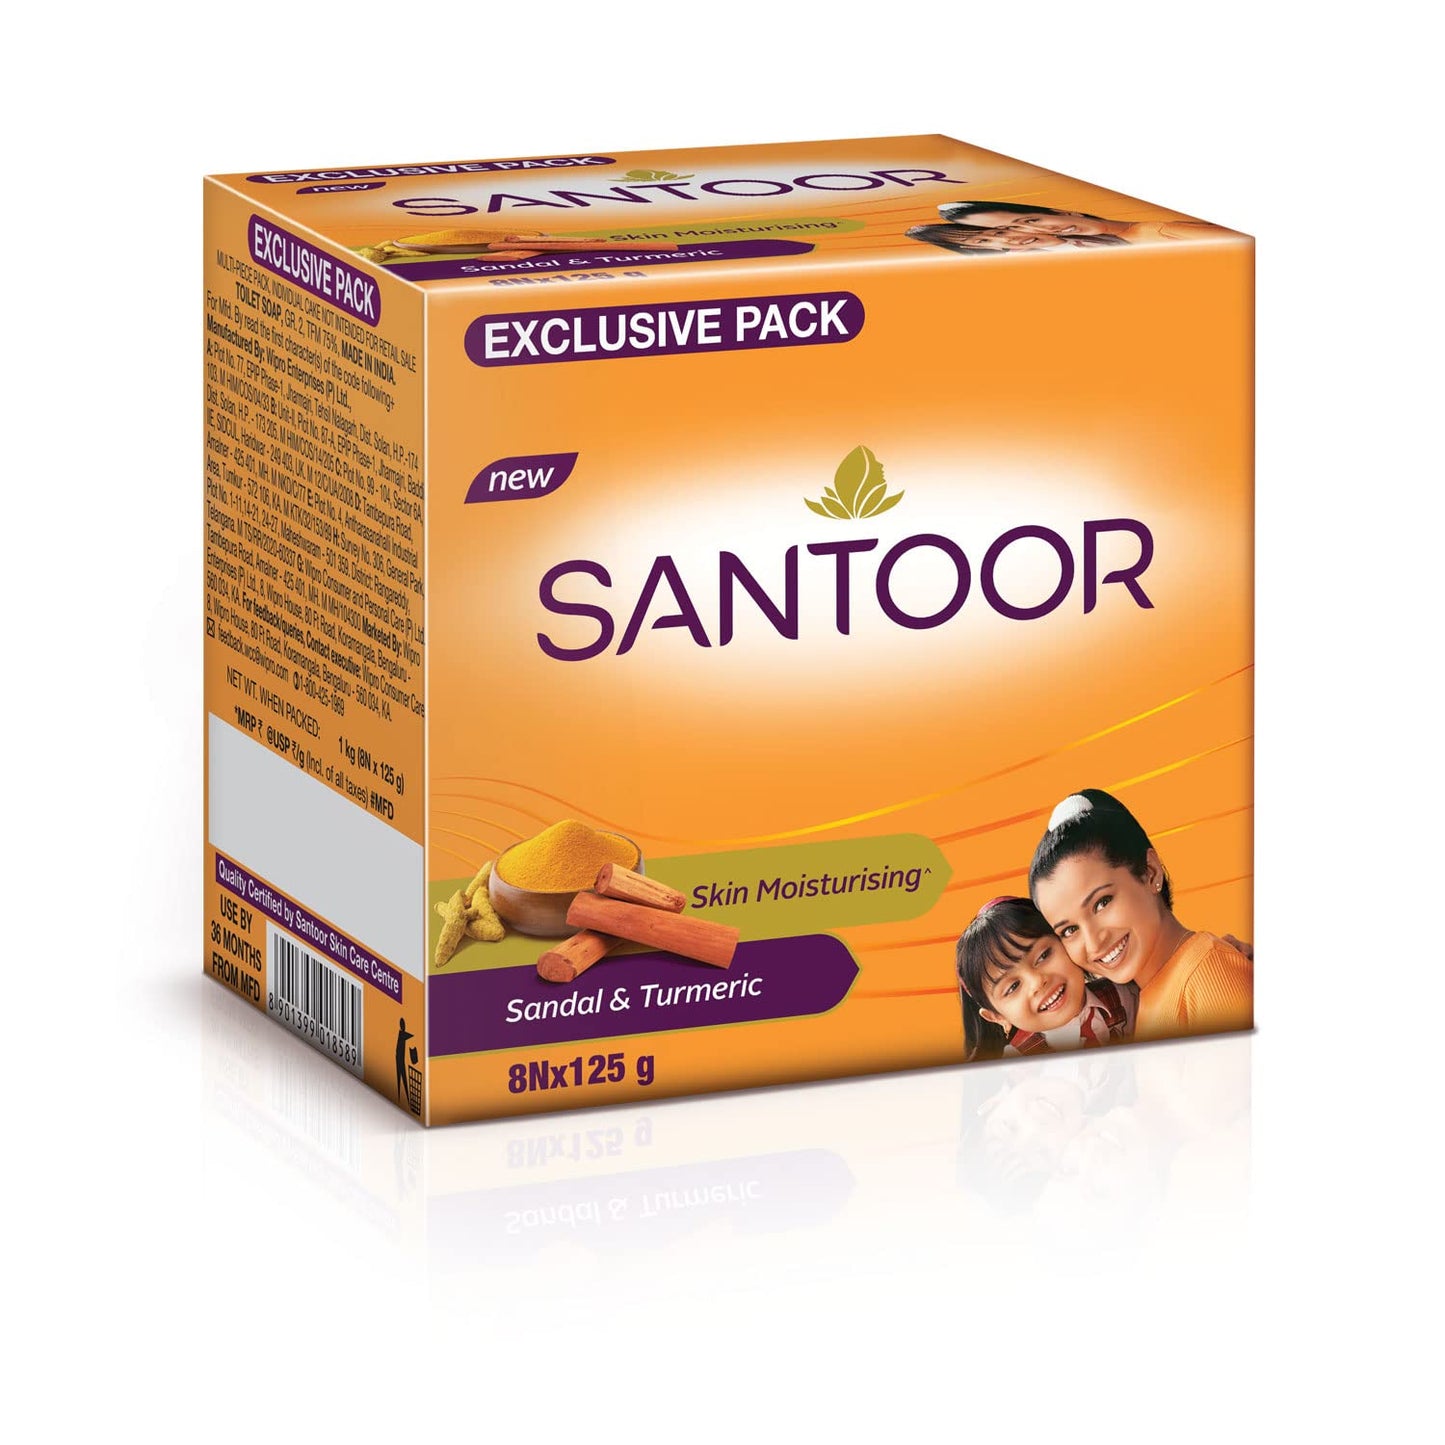 Santoor Skin Moisturizing Sandal & Turmeric Bathing Soap with Nourishing & Anti-Aging Properties| For Soft & Smooth and Younger-Looking Skin| For All Skin Types| Pack of 8, 125g